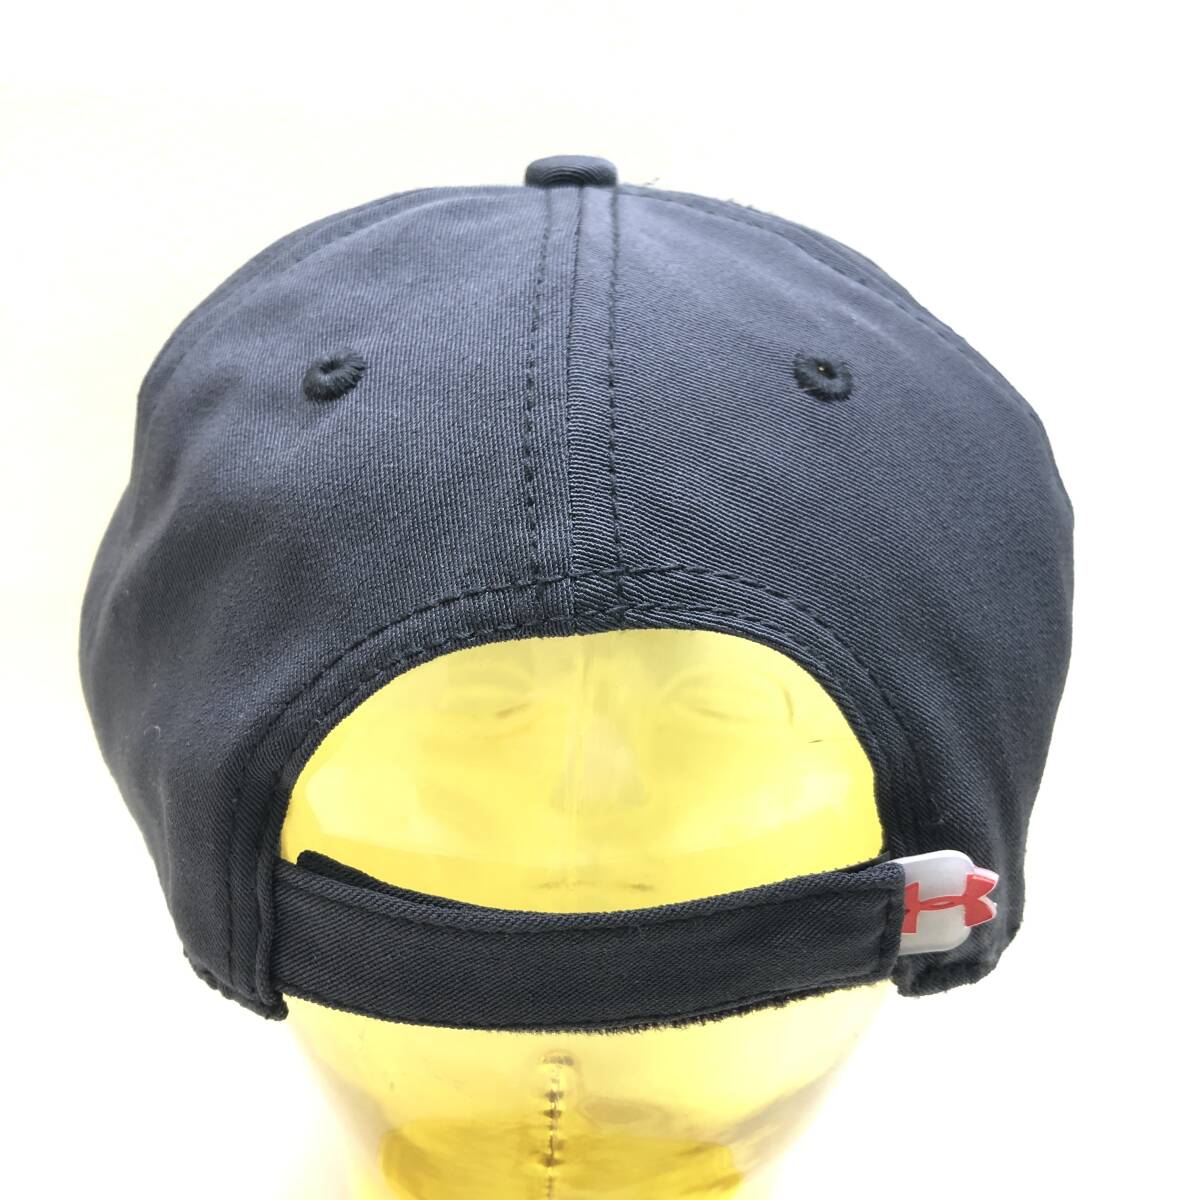 *UNDER ARMOUR Under Armor OSFA men's hat cap clothing accessories apparel fashion secondhand goods *K01363